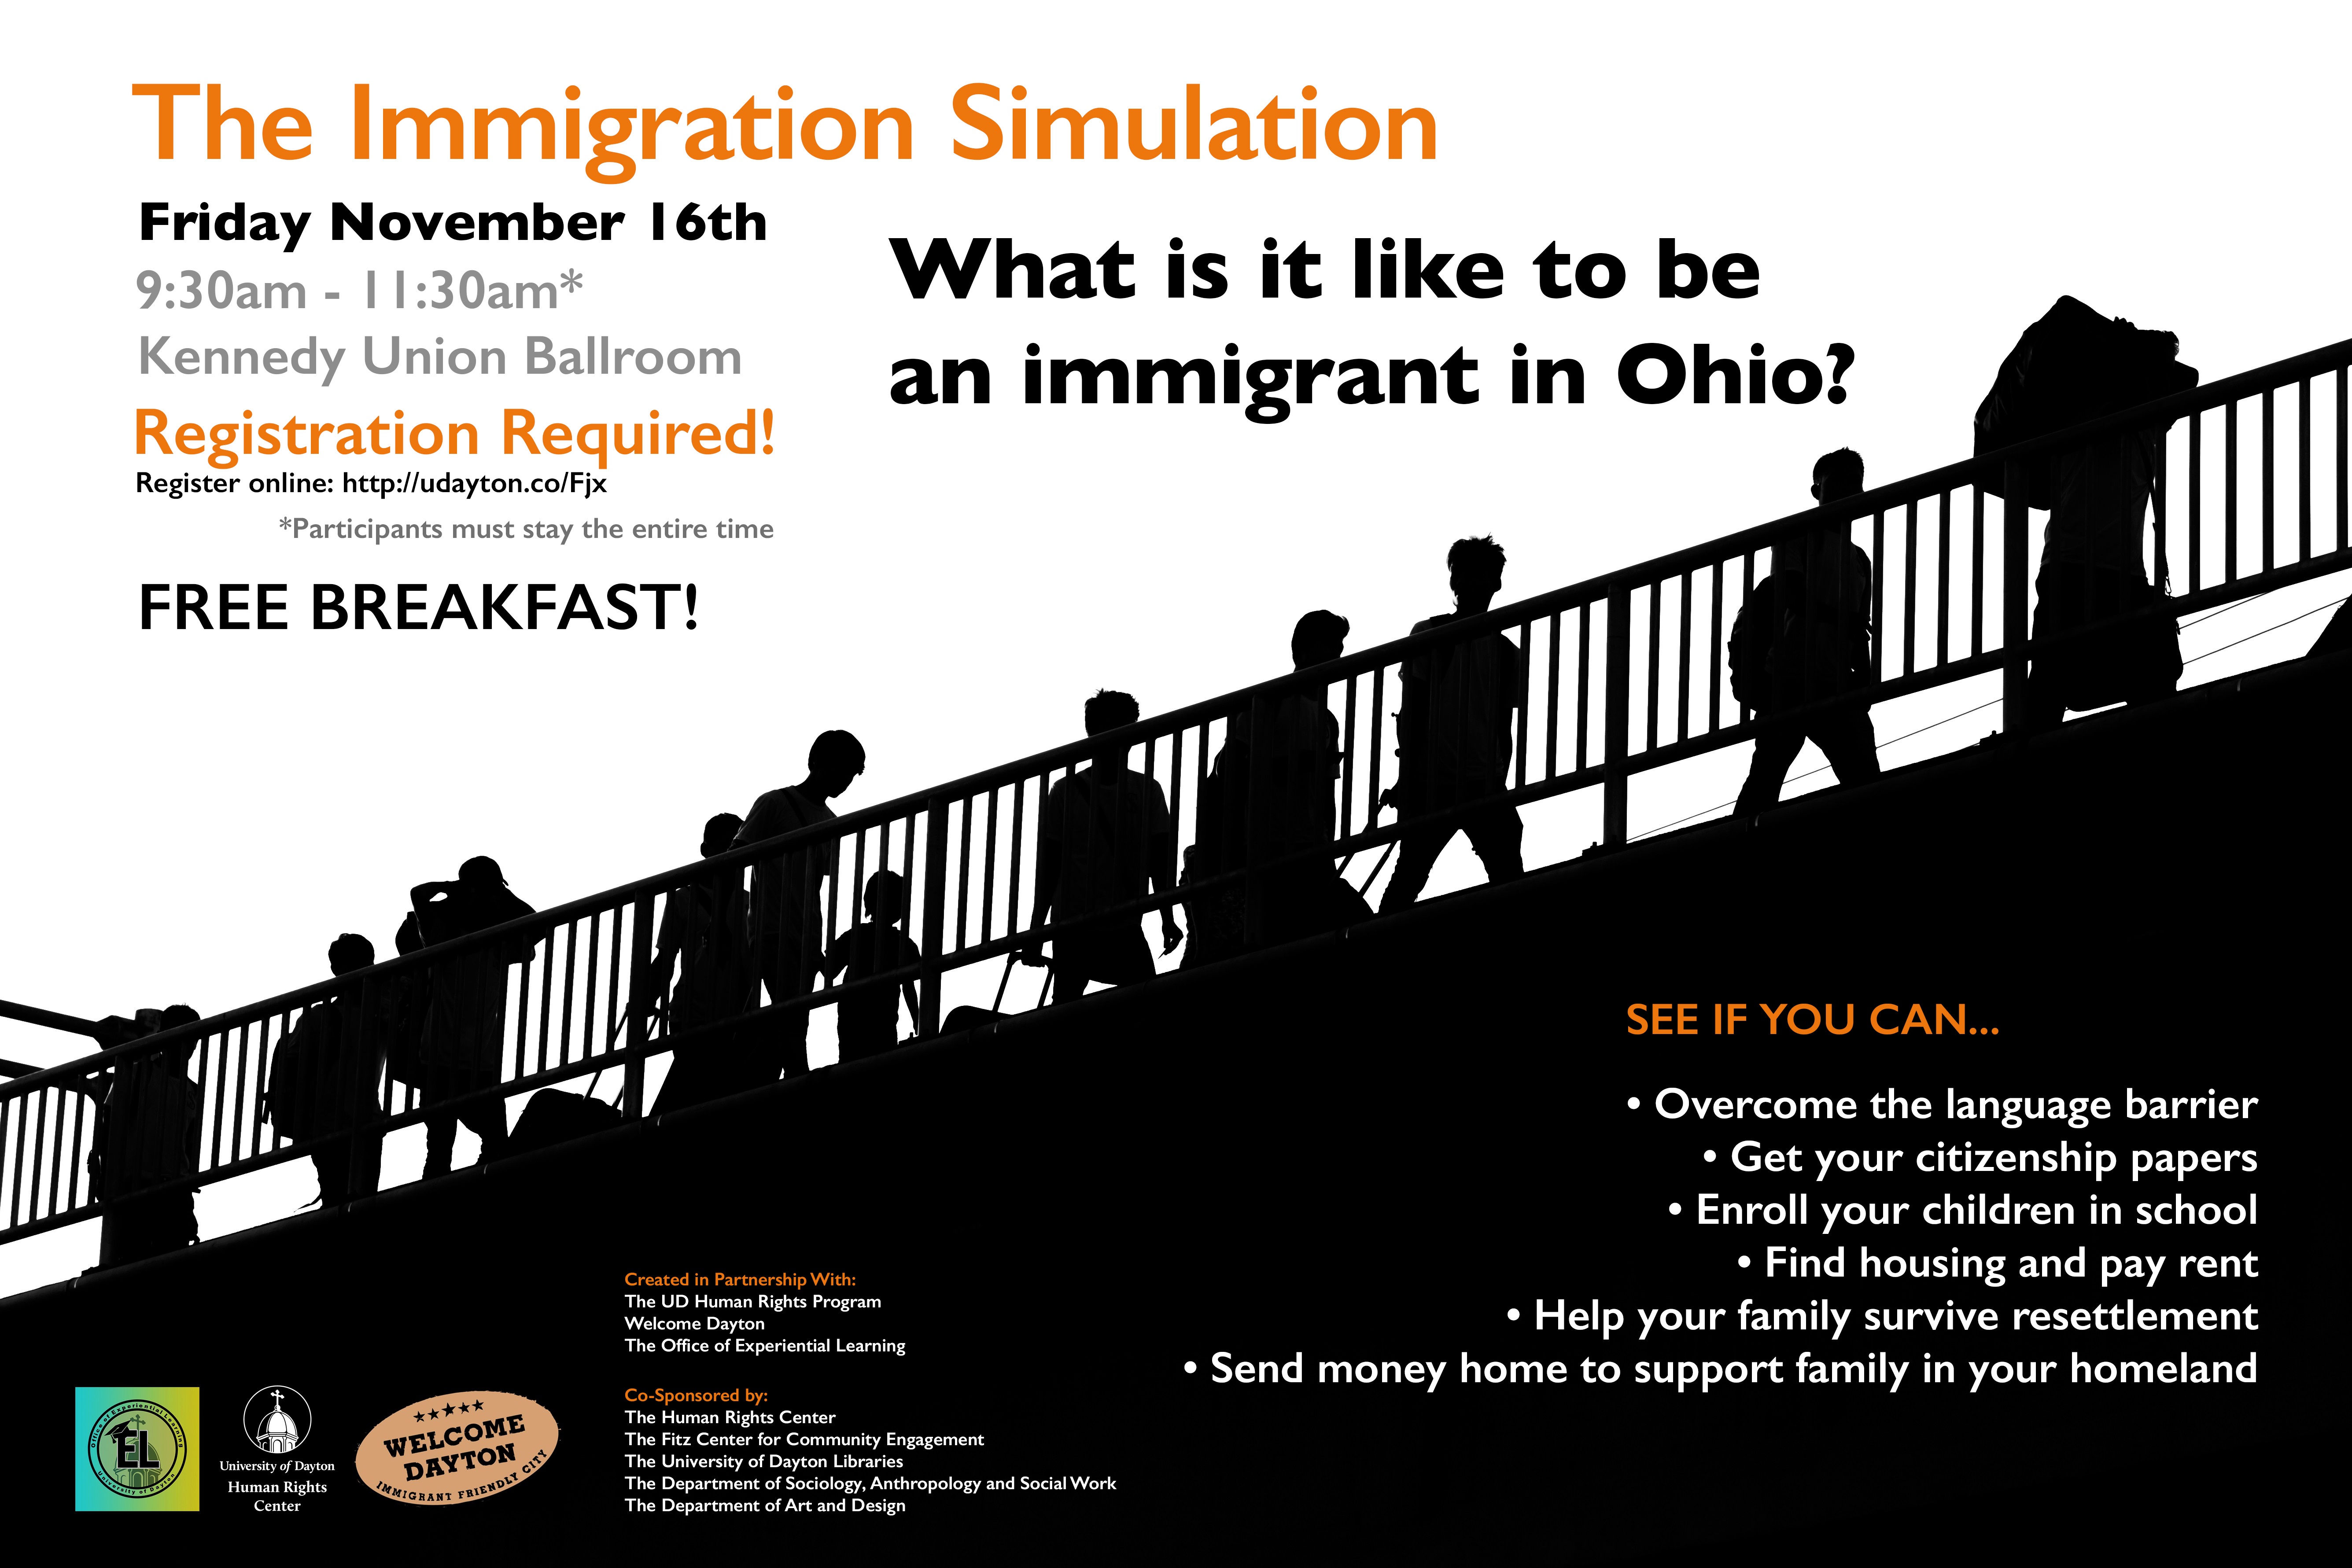 Immigration Simulation poster.